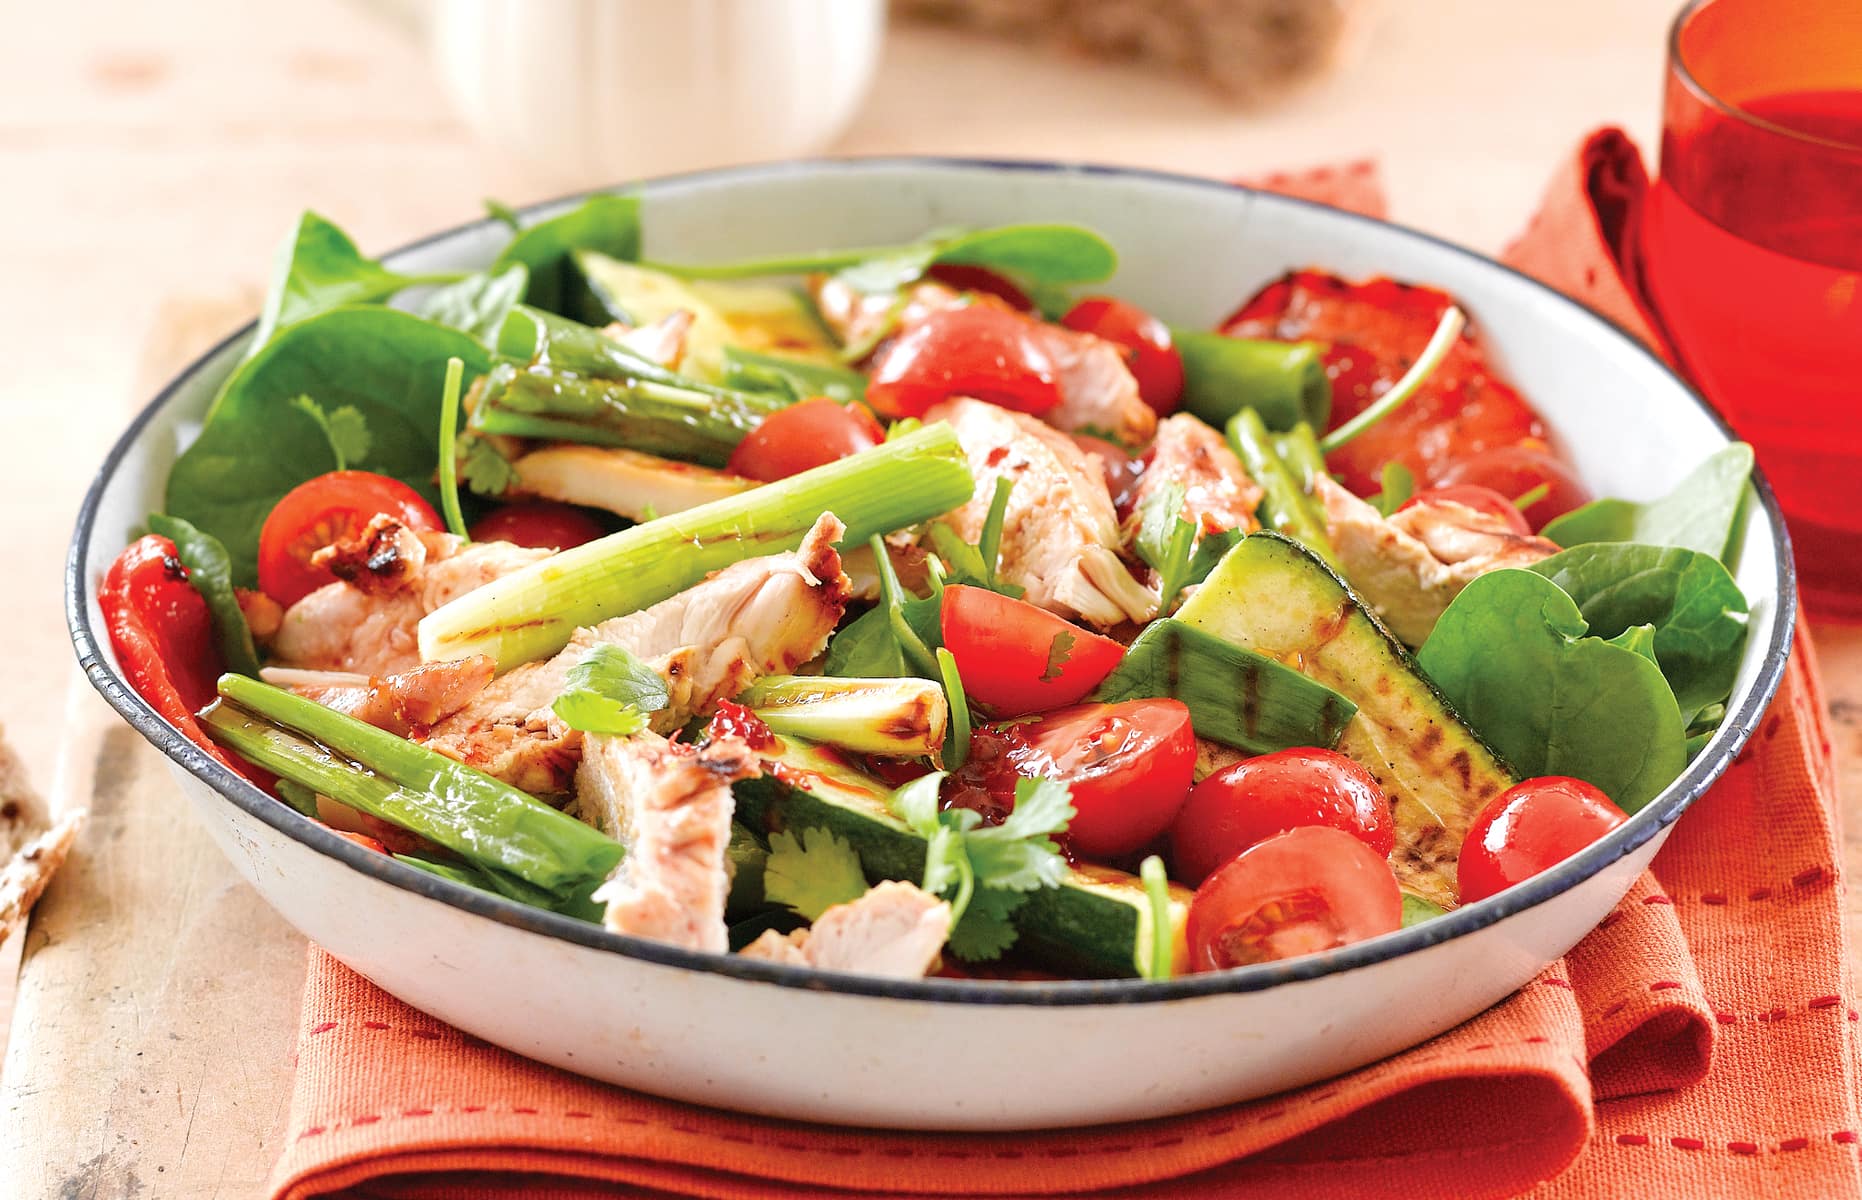 BBQ chicken salad with zingy ginger dressing - Healthy Food Guide